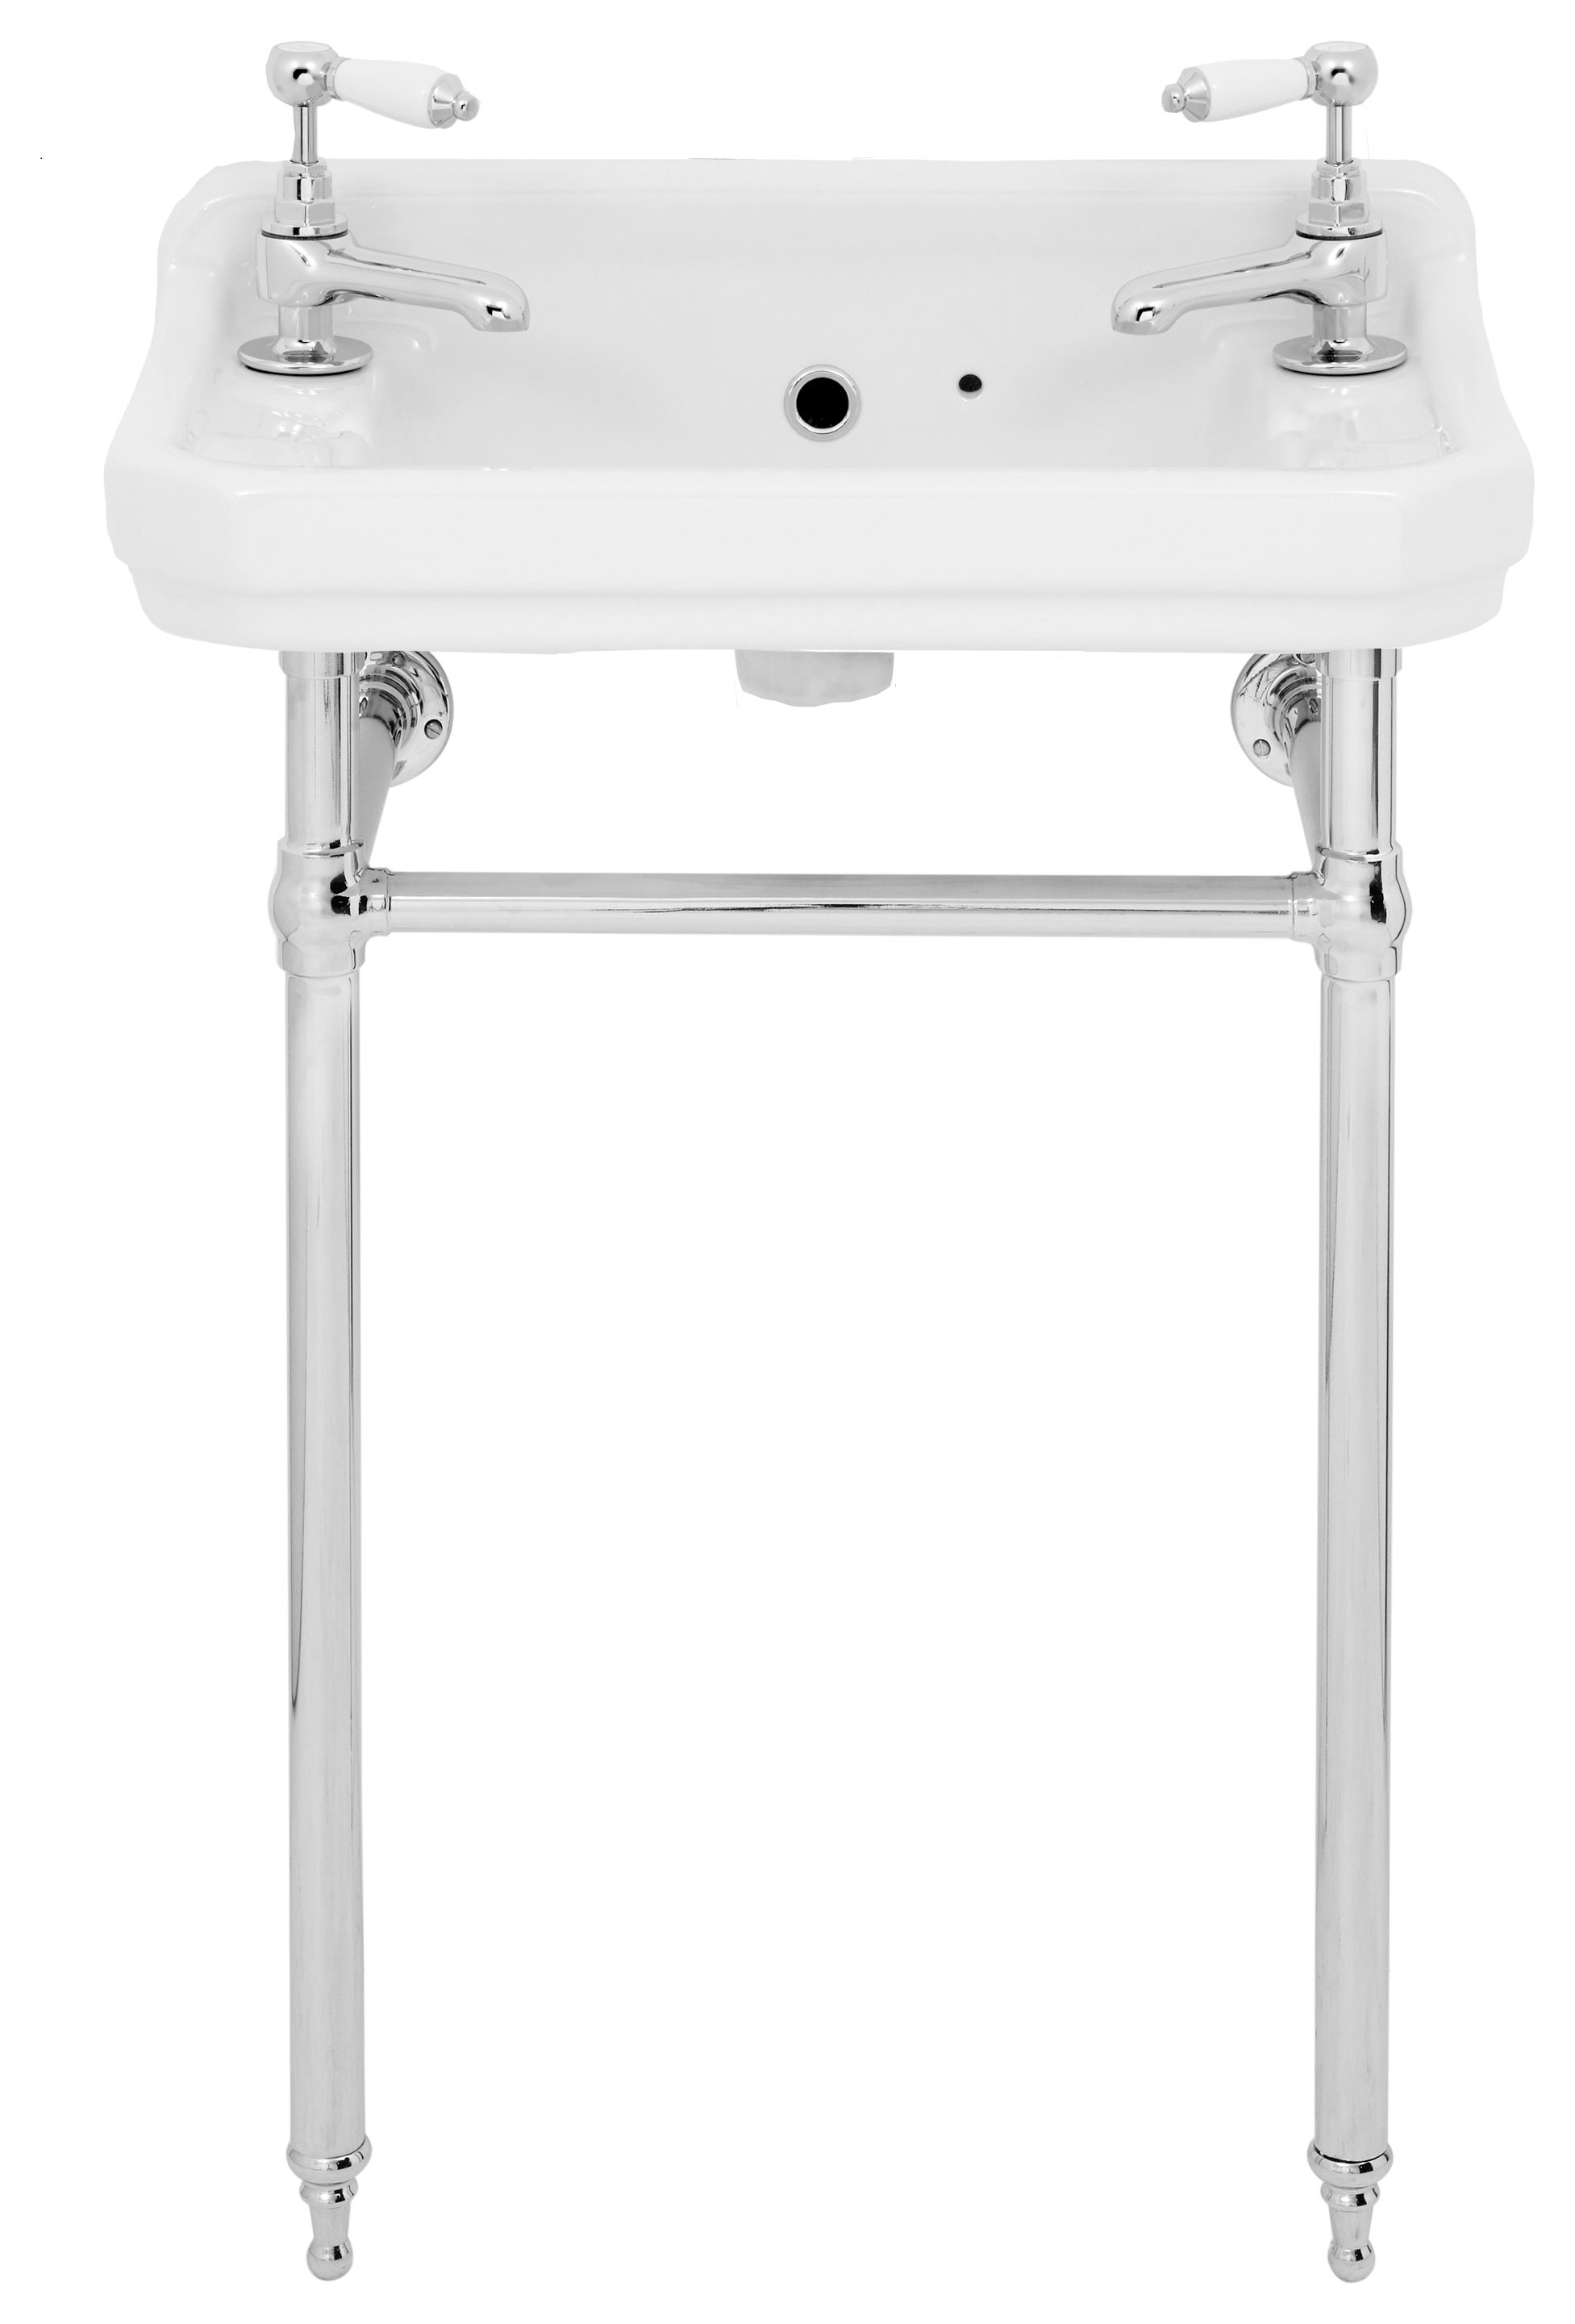 Wickes Oxford Traditional 2 Tap Hole Ceramic Basin with Chrome Washstand